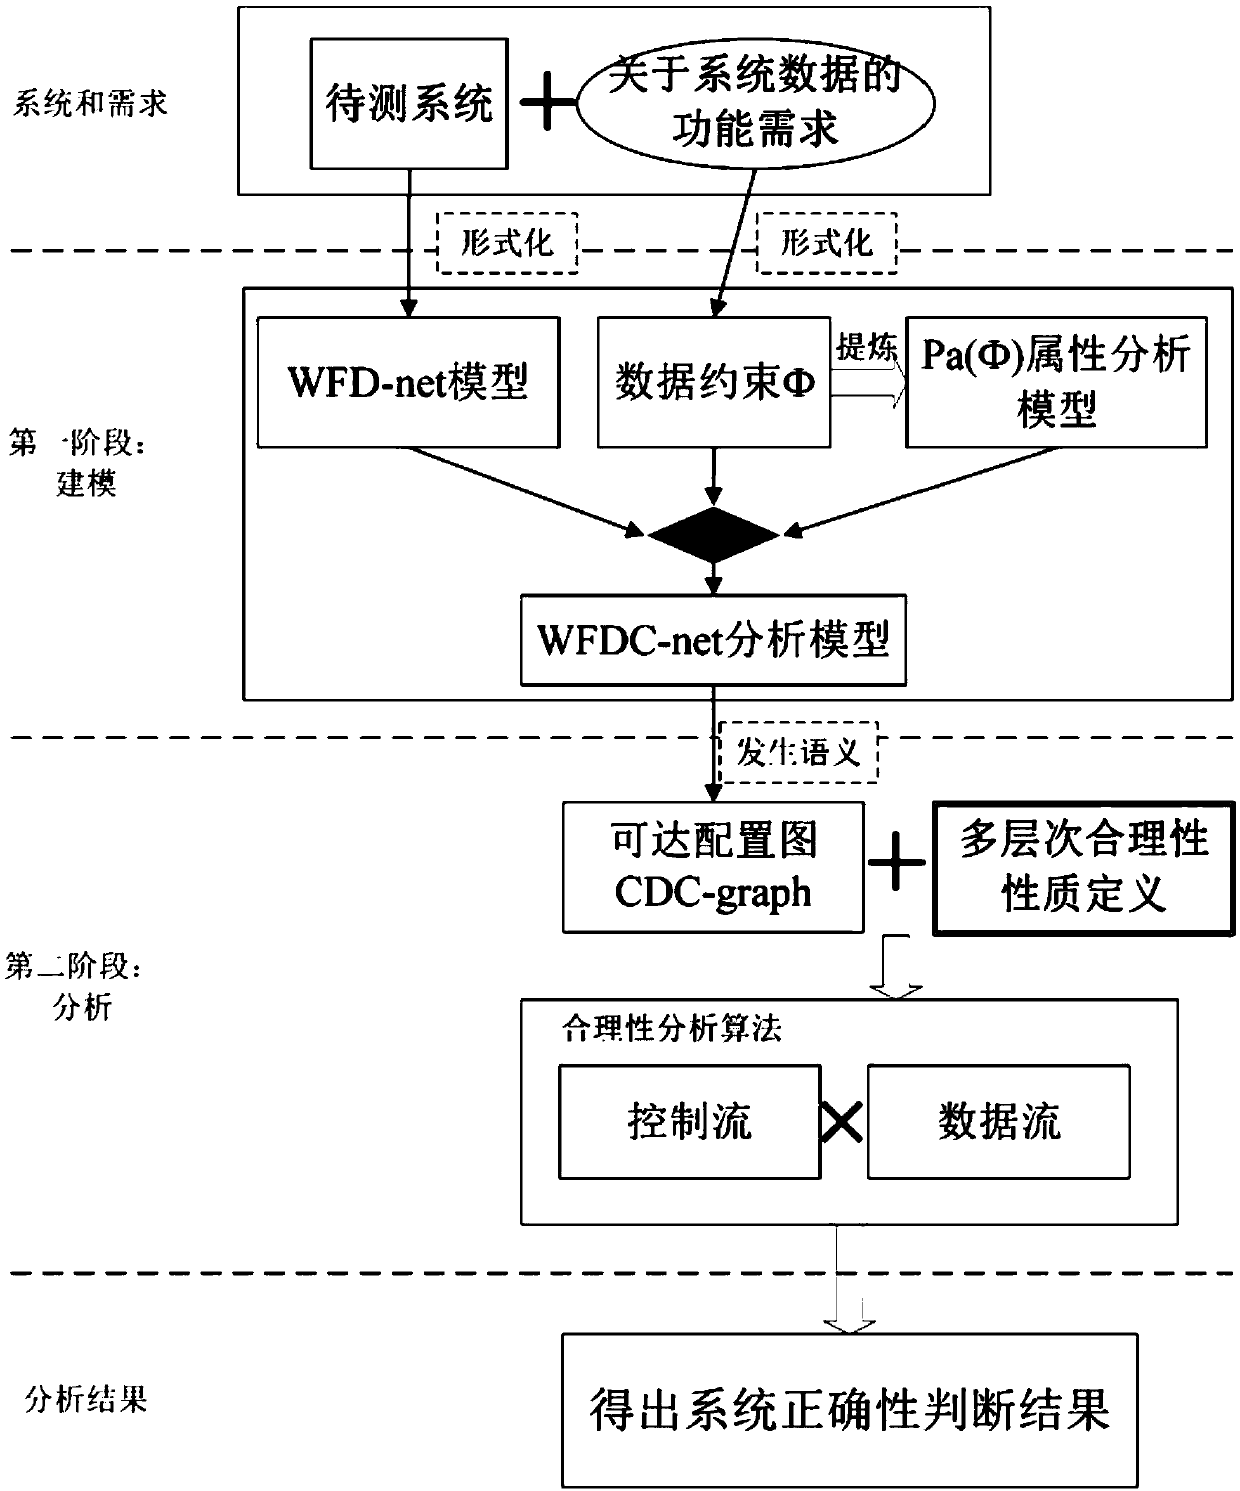 Abnormal fragment extraction method for workflow net inspection, readable storage medium and terminal